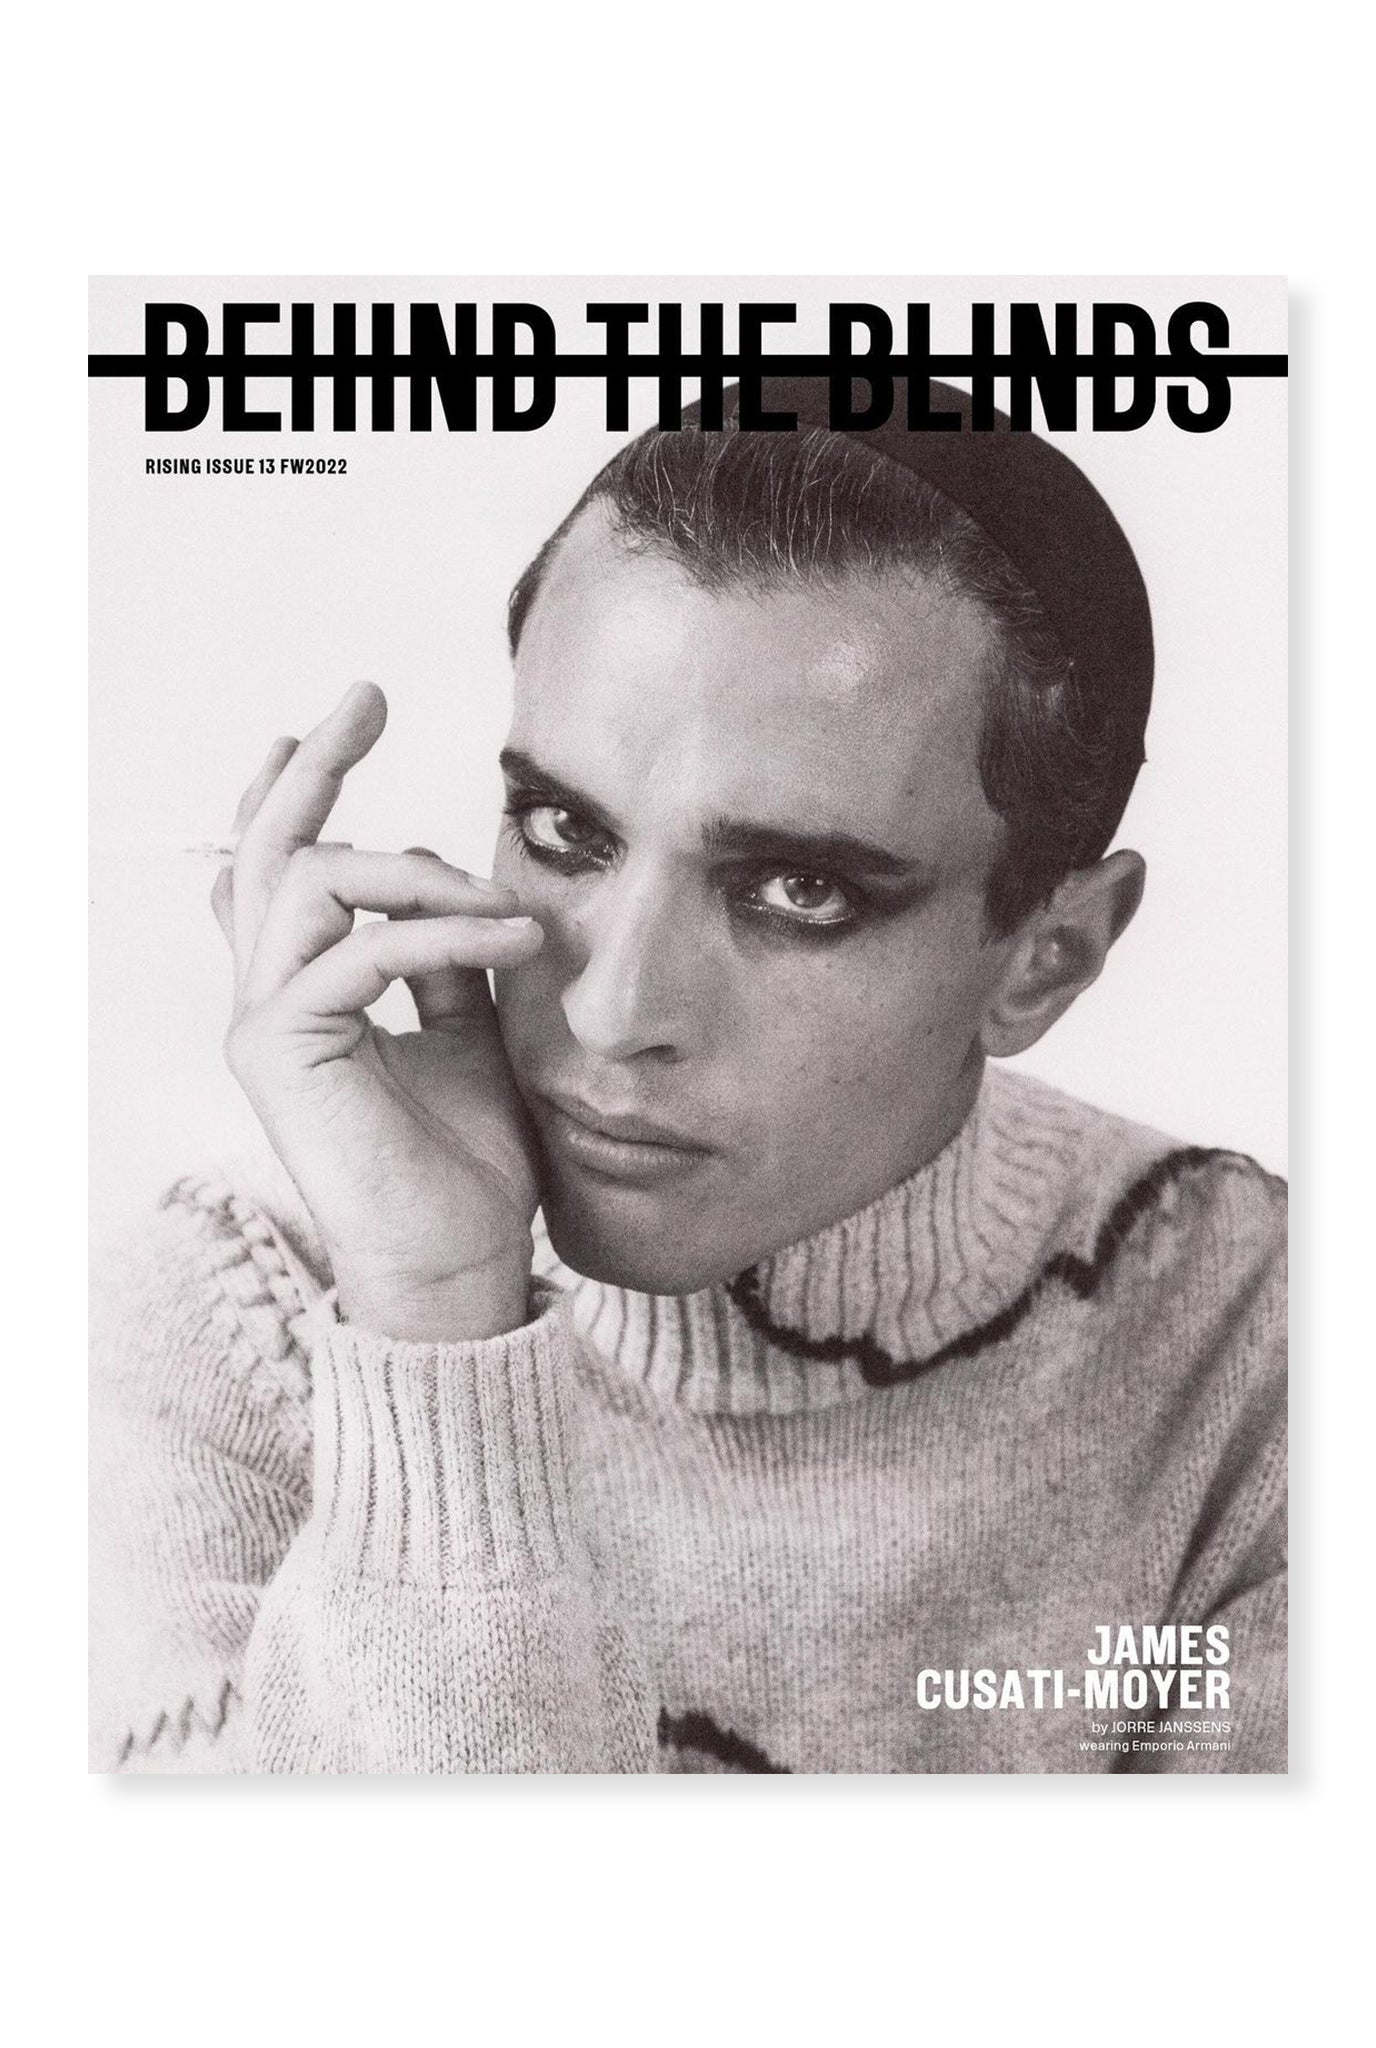 Behind The Blinds, Issue 13